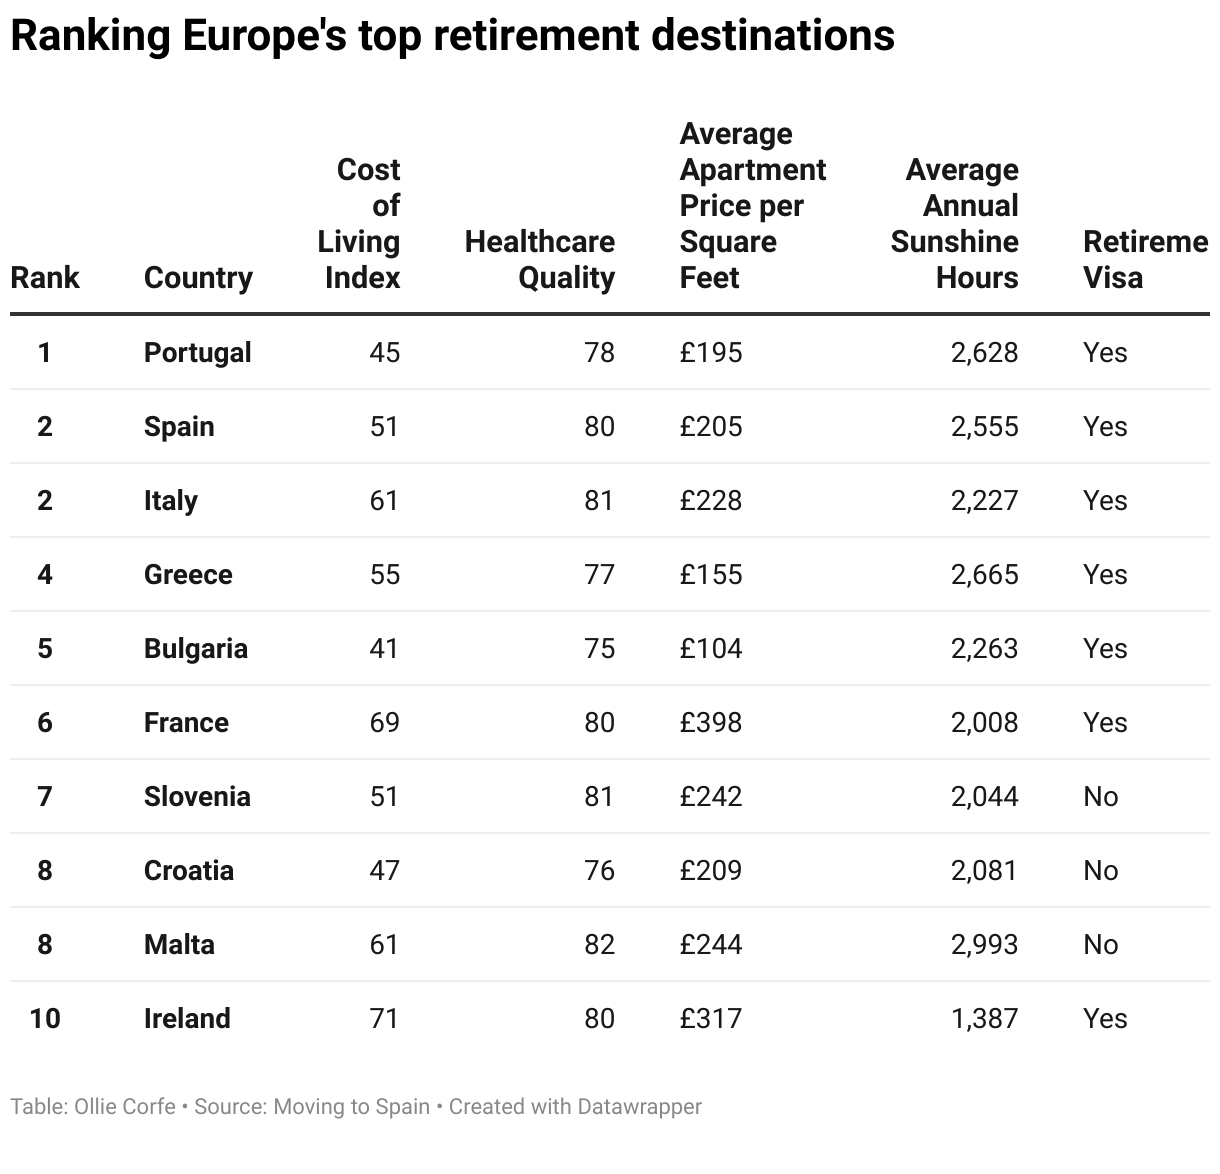 Table of retirement rankings in Europe.